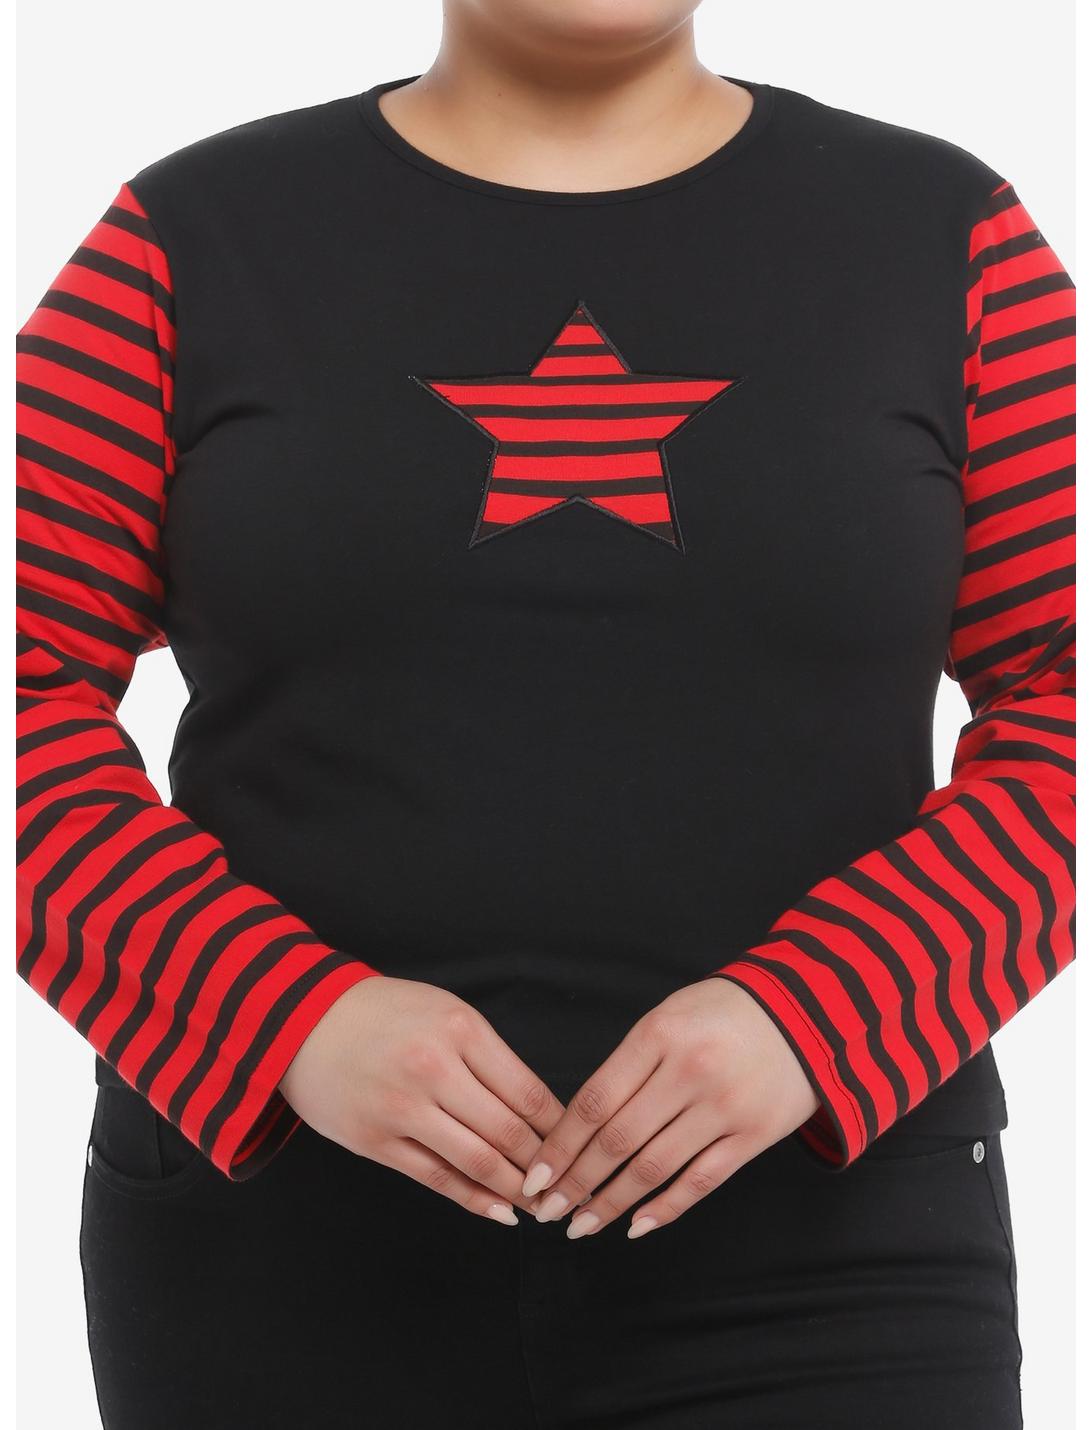 Social Collision® Black & Red Stripe Star Girls Long-Sleeve Crop Top Plus Size, RED, hi-res